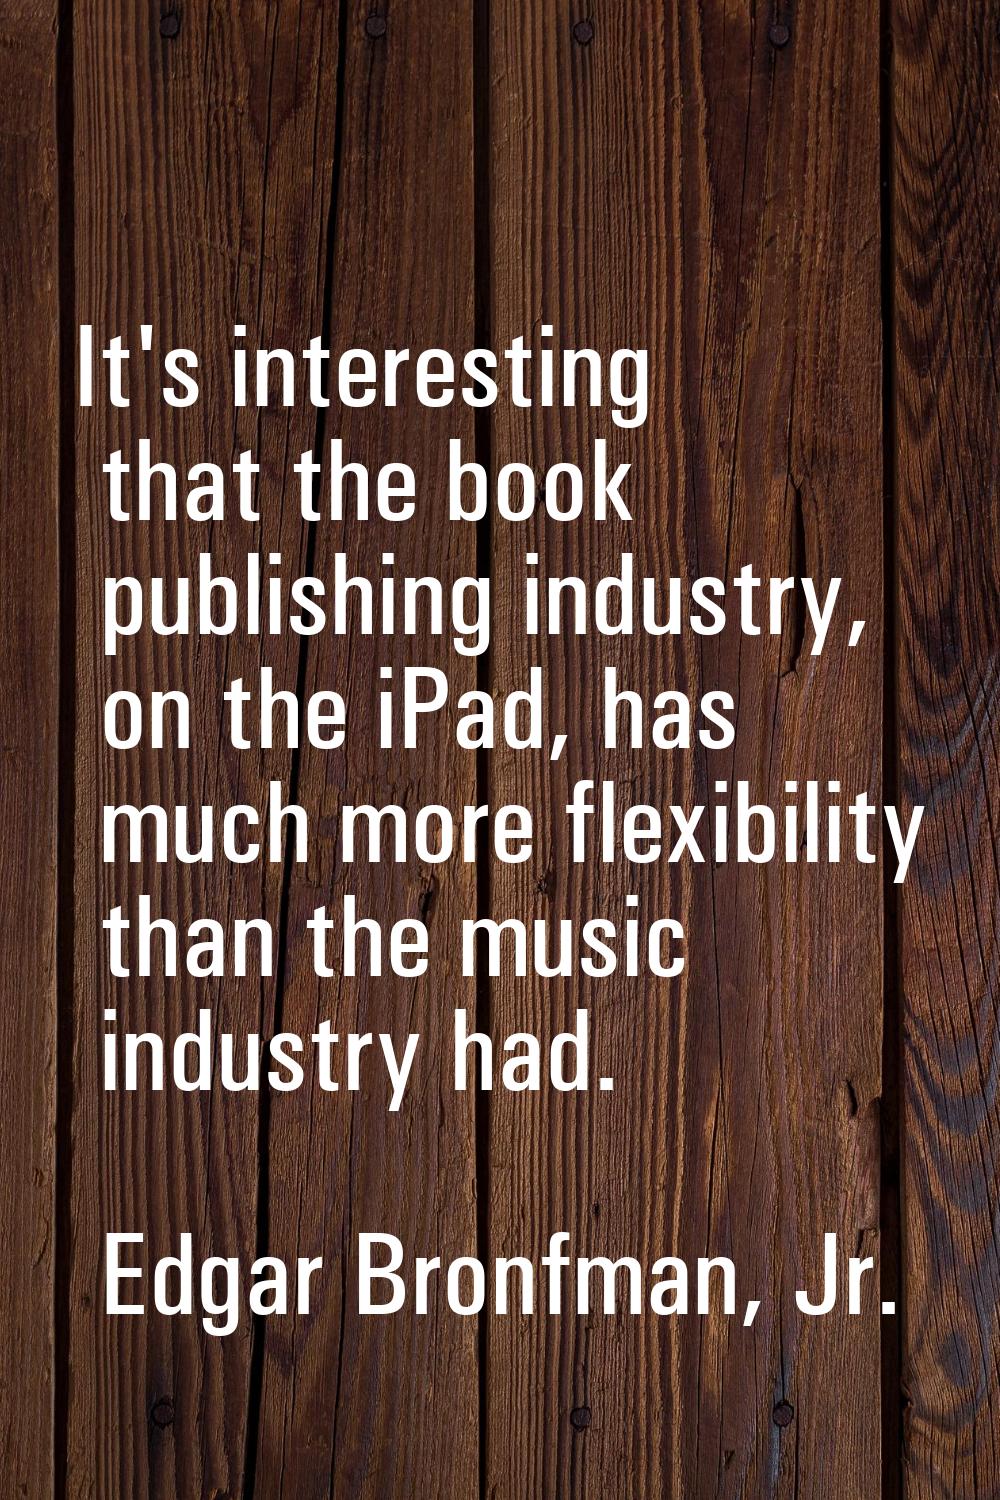 It's interesting that the book publishing industry, on the iPad, has much more flexibility than the